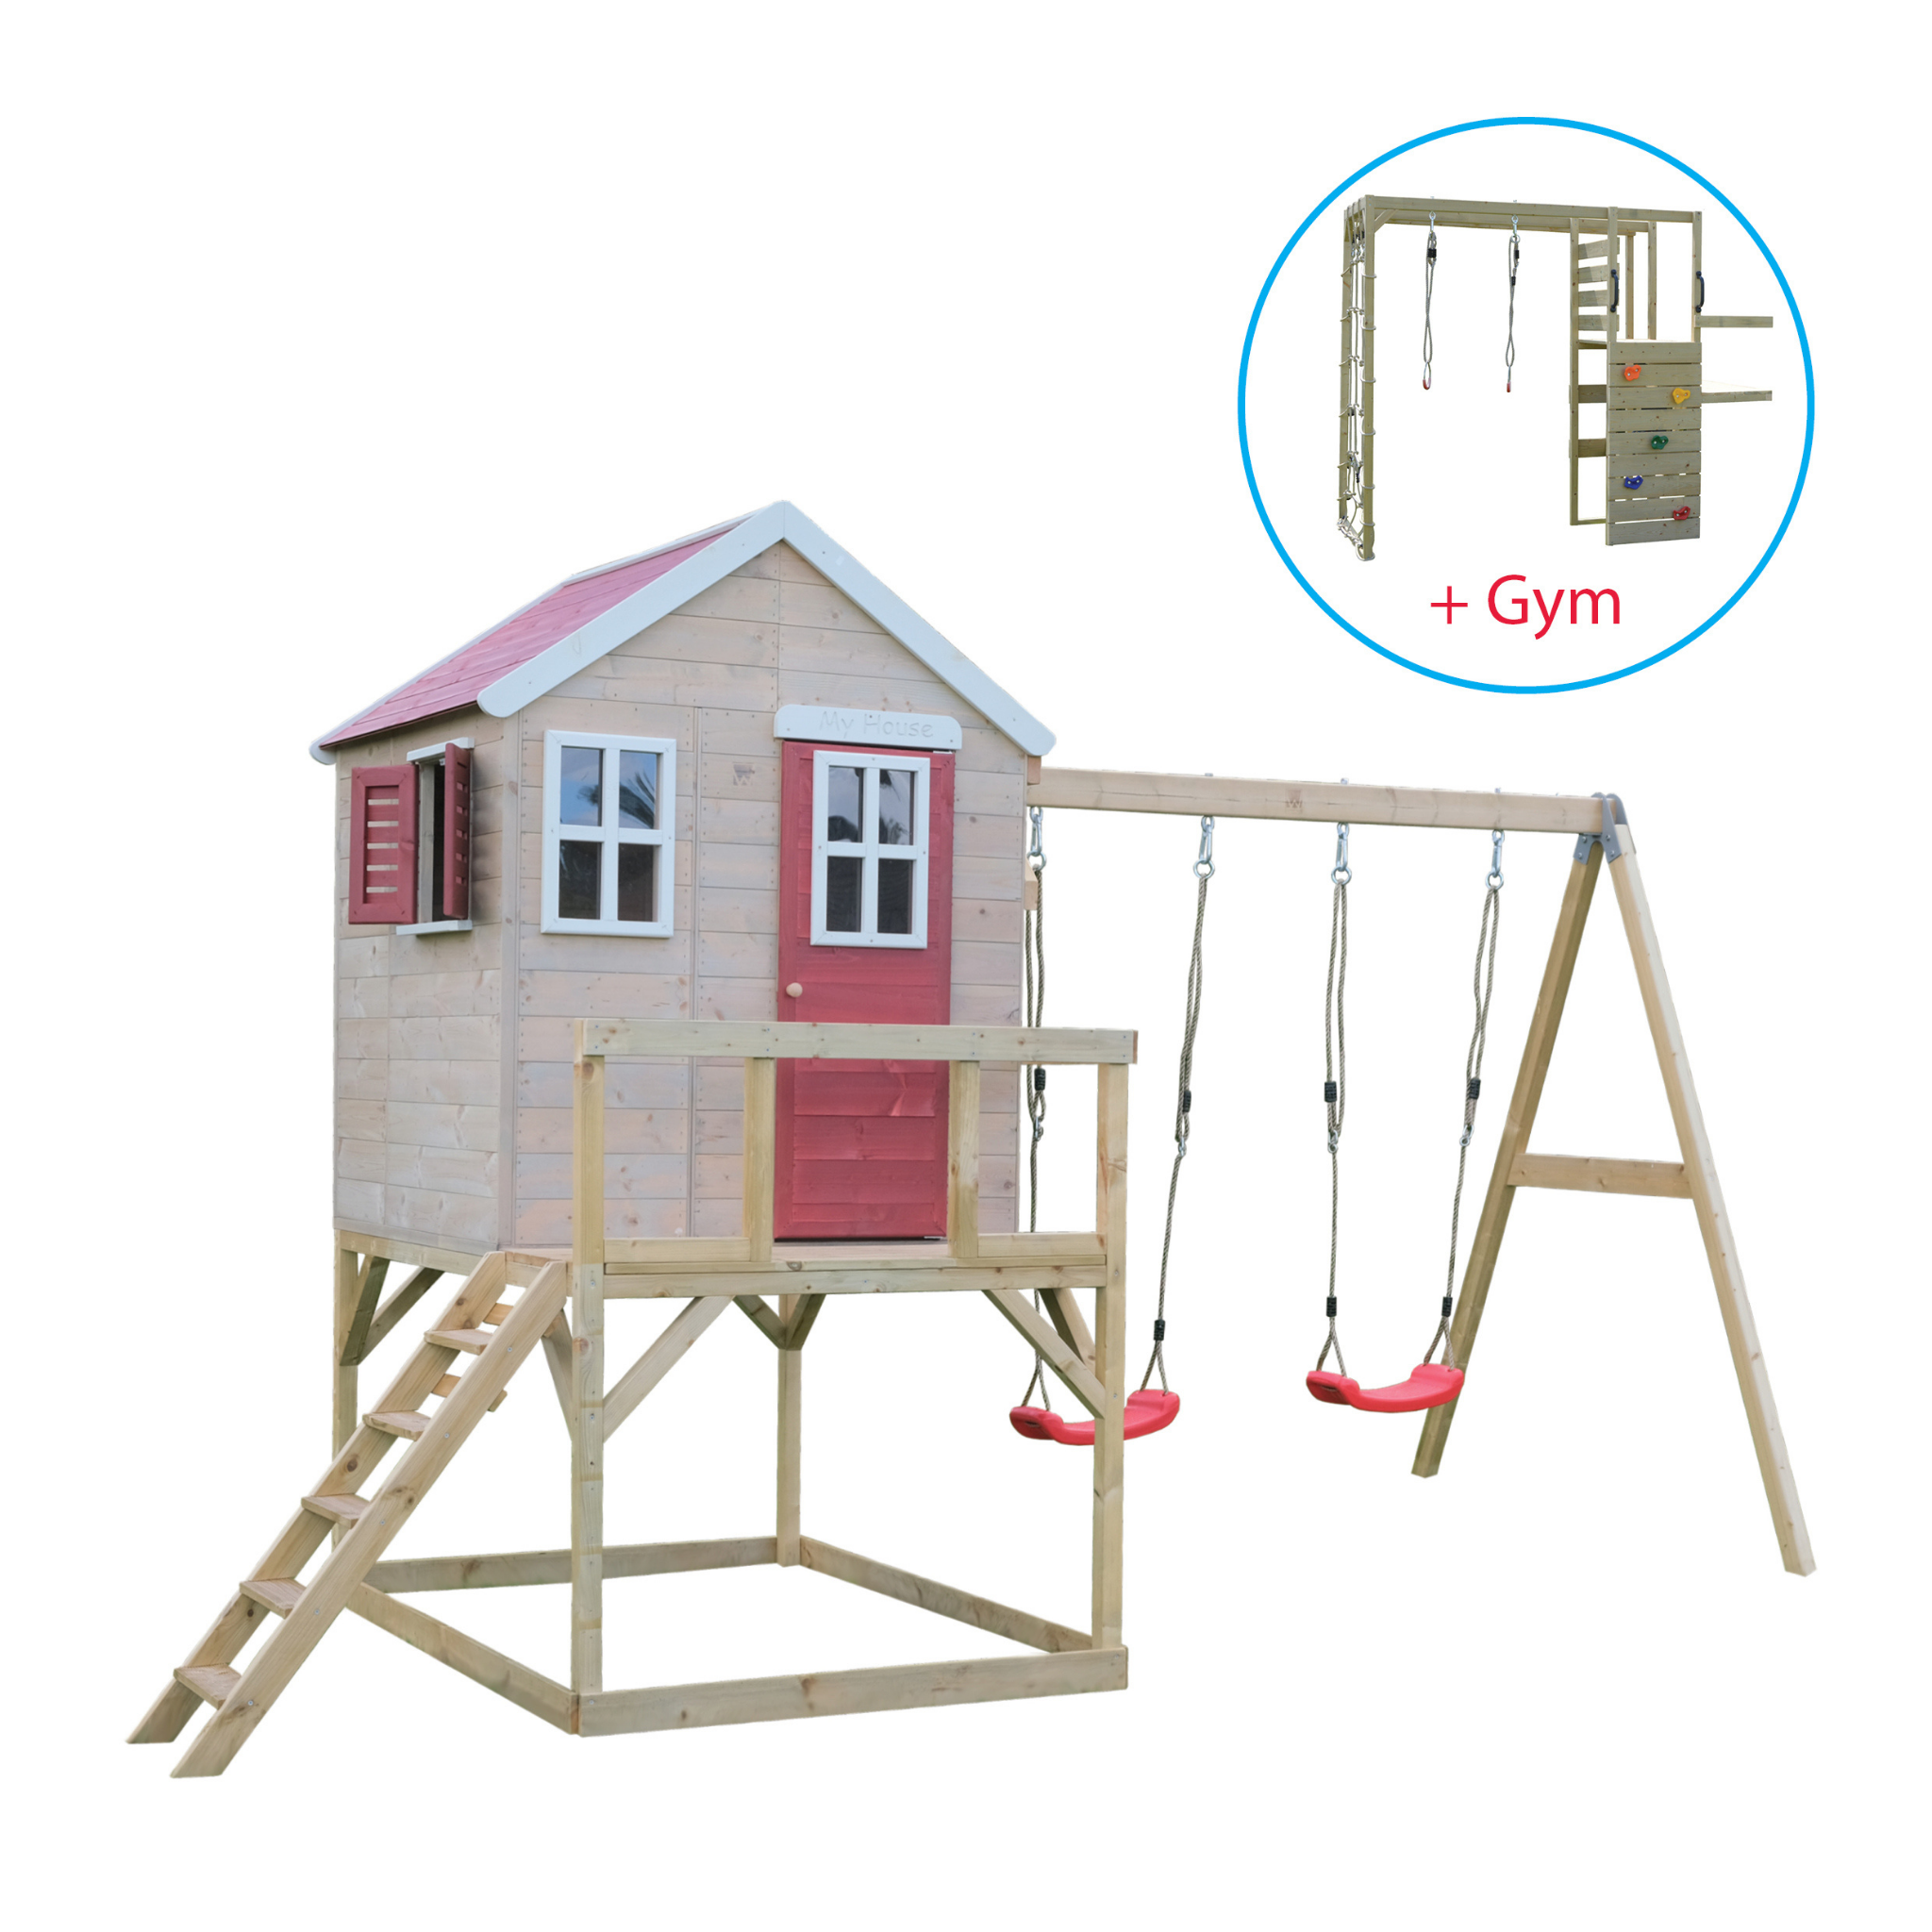 M27-G My Lodge with Platform and Double Swing + Gym